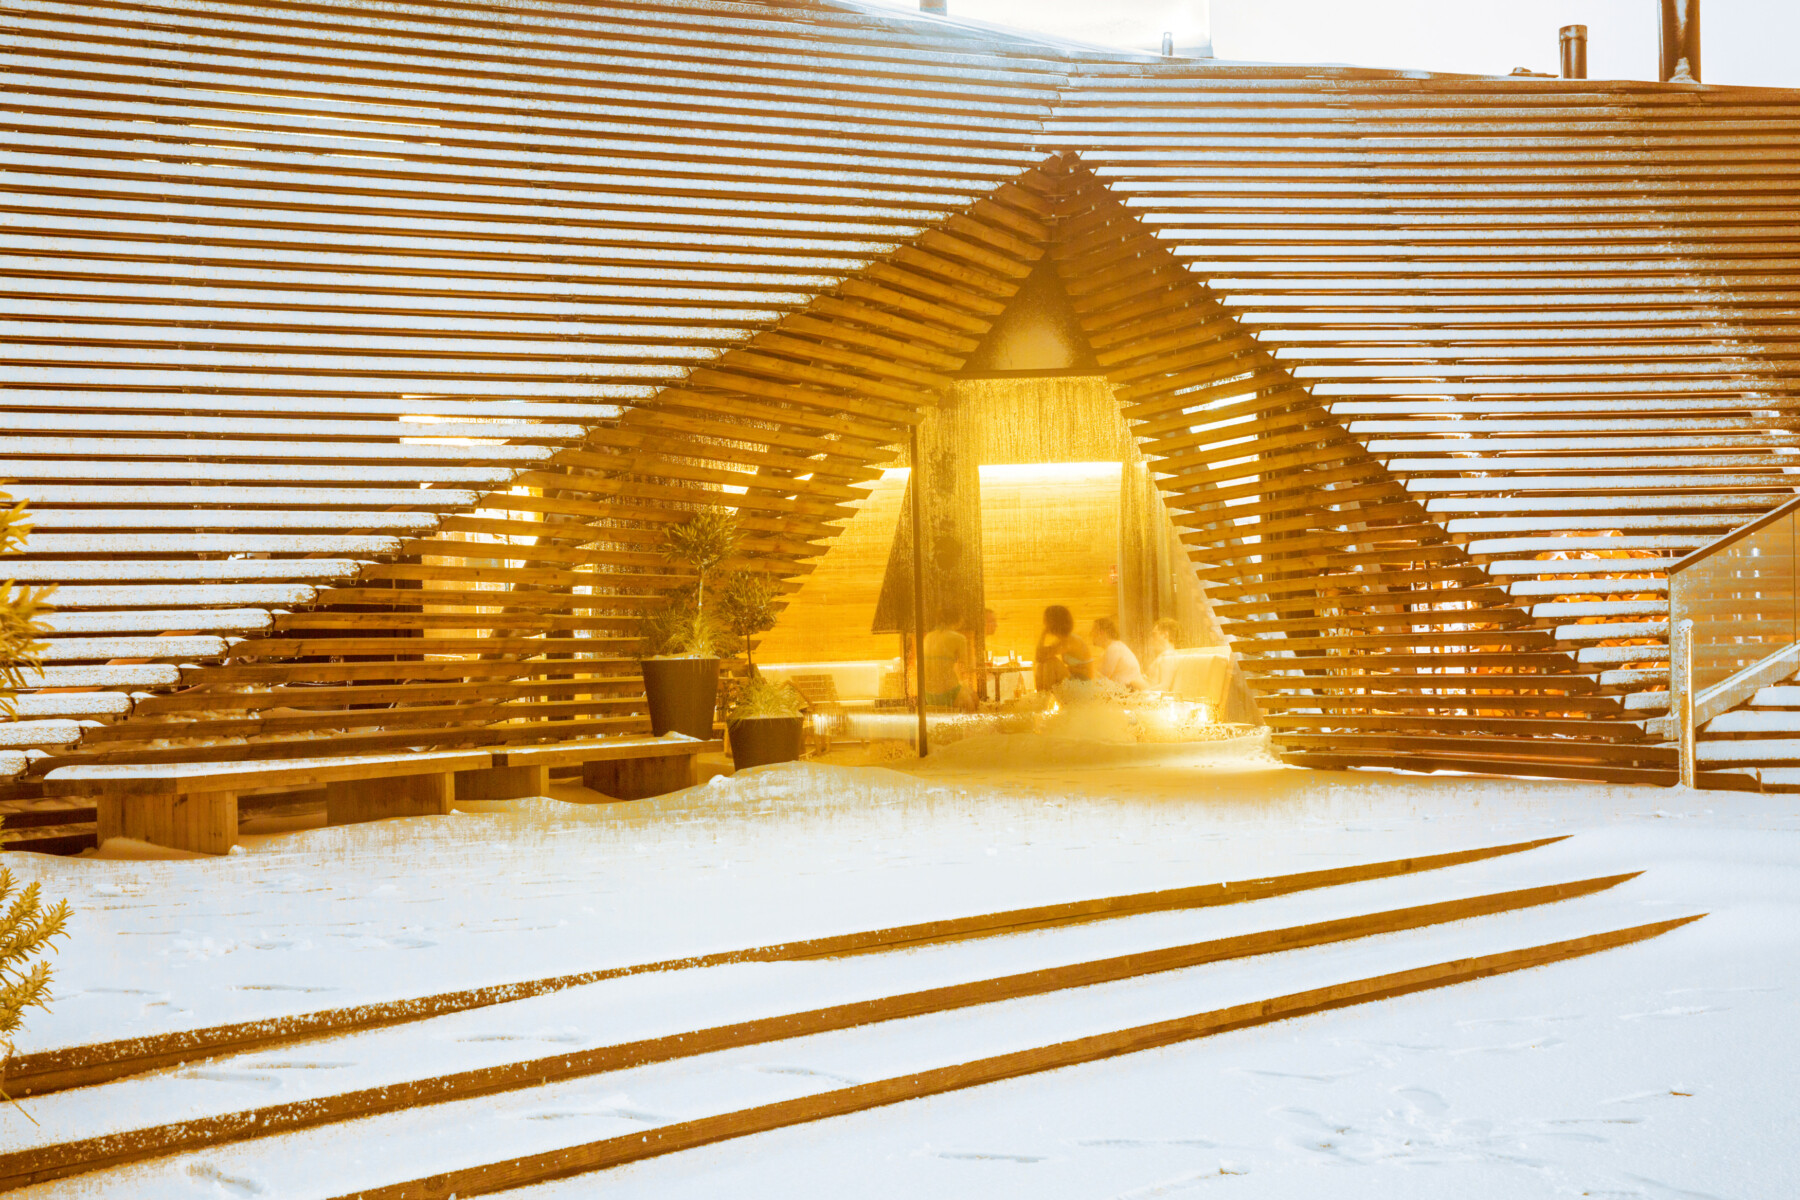 A wooden building with a triangular archway is snowy on the outside and a window shows people sitting in a cosy room on the inside.